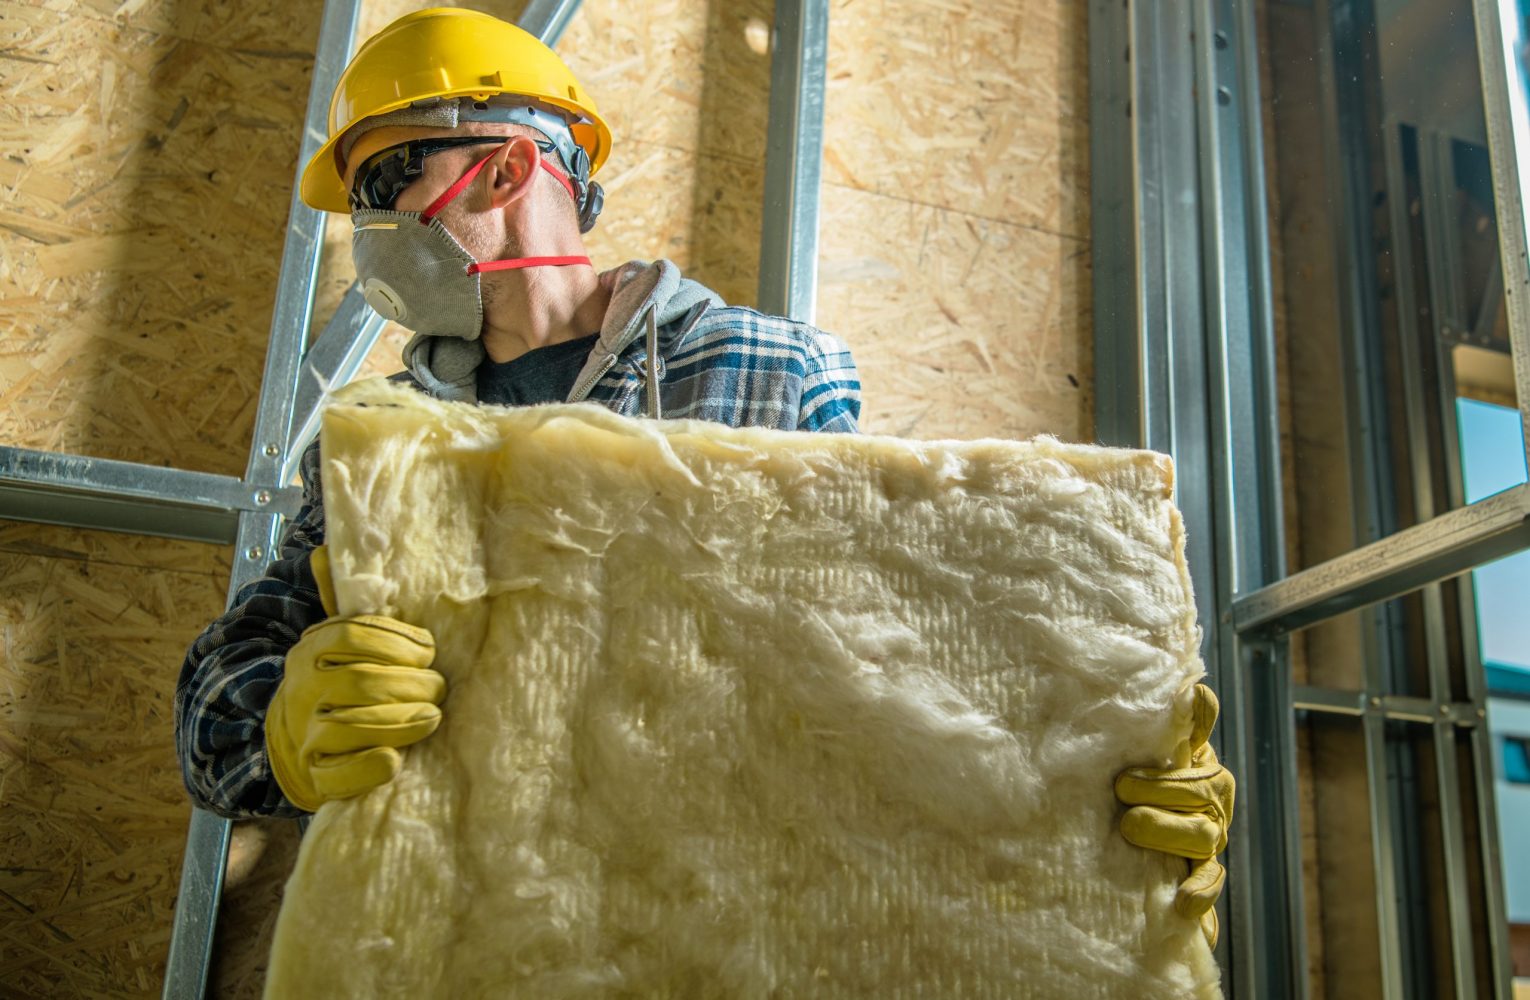 Caucasian Construction Worker Wearing Safety Mask Moving Pieces of Mineral Wool Insulation.